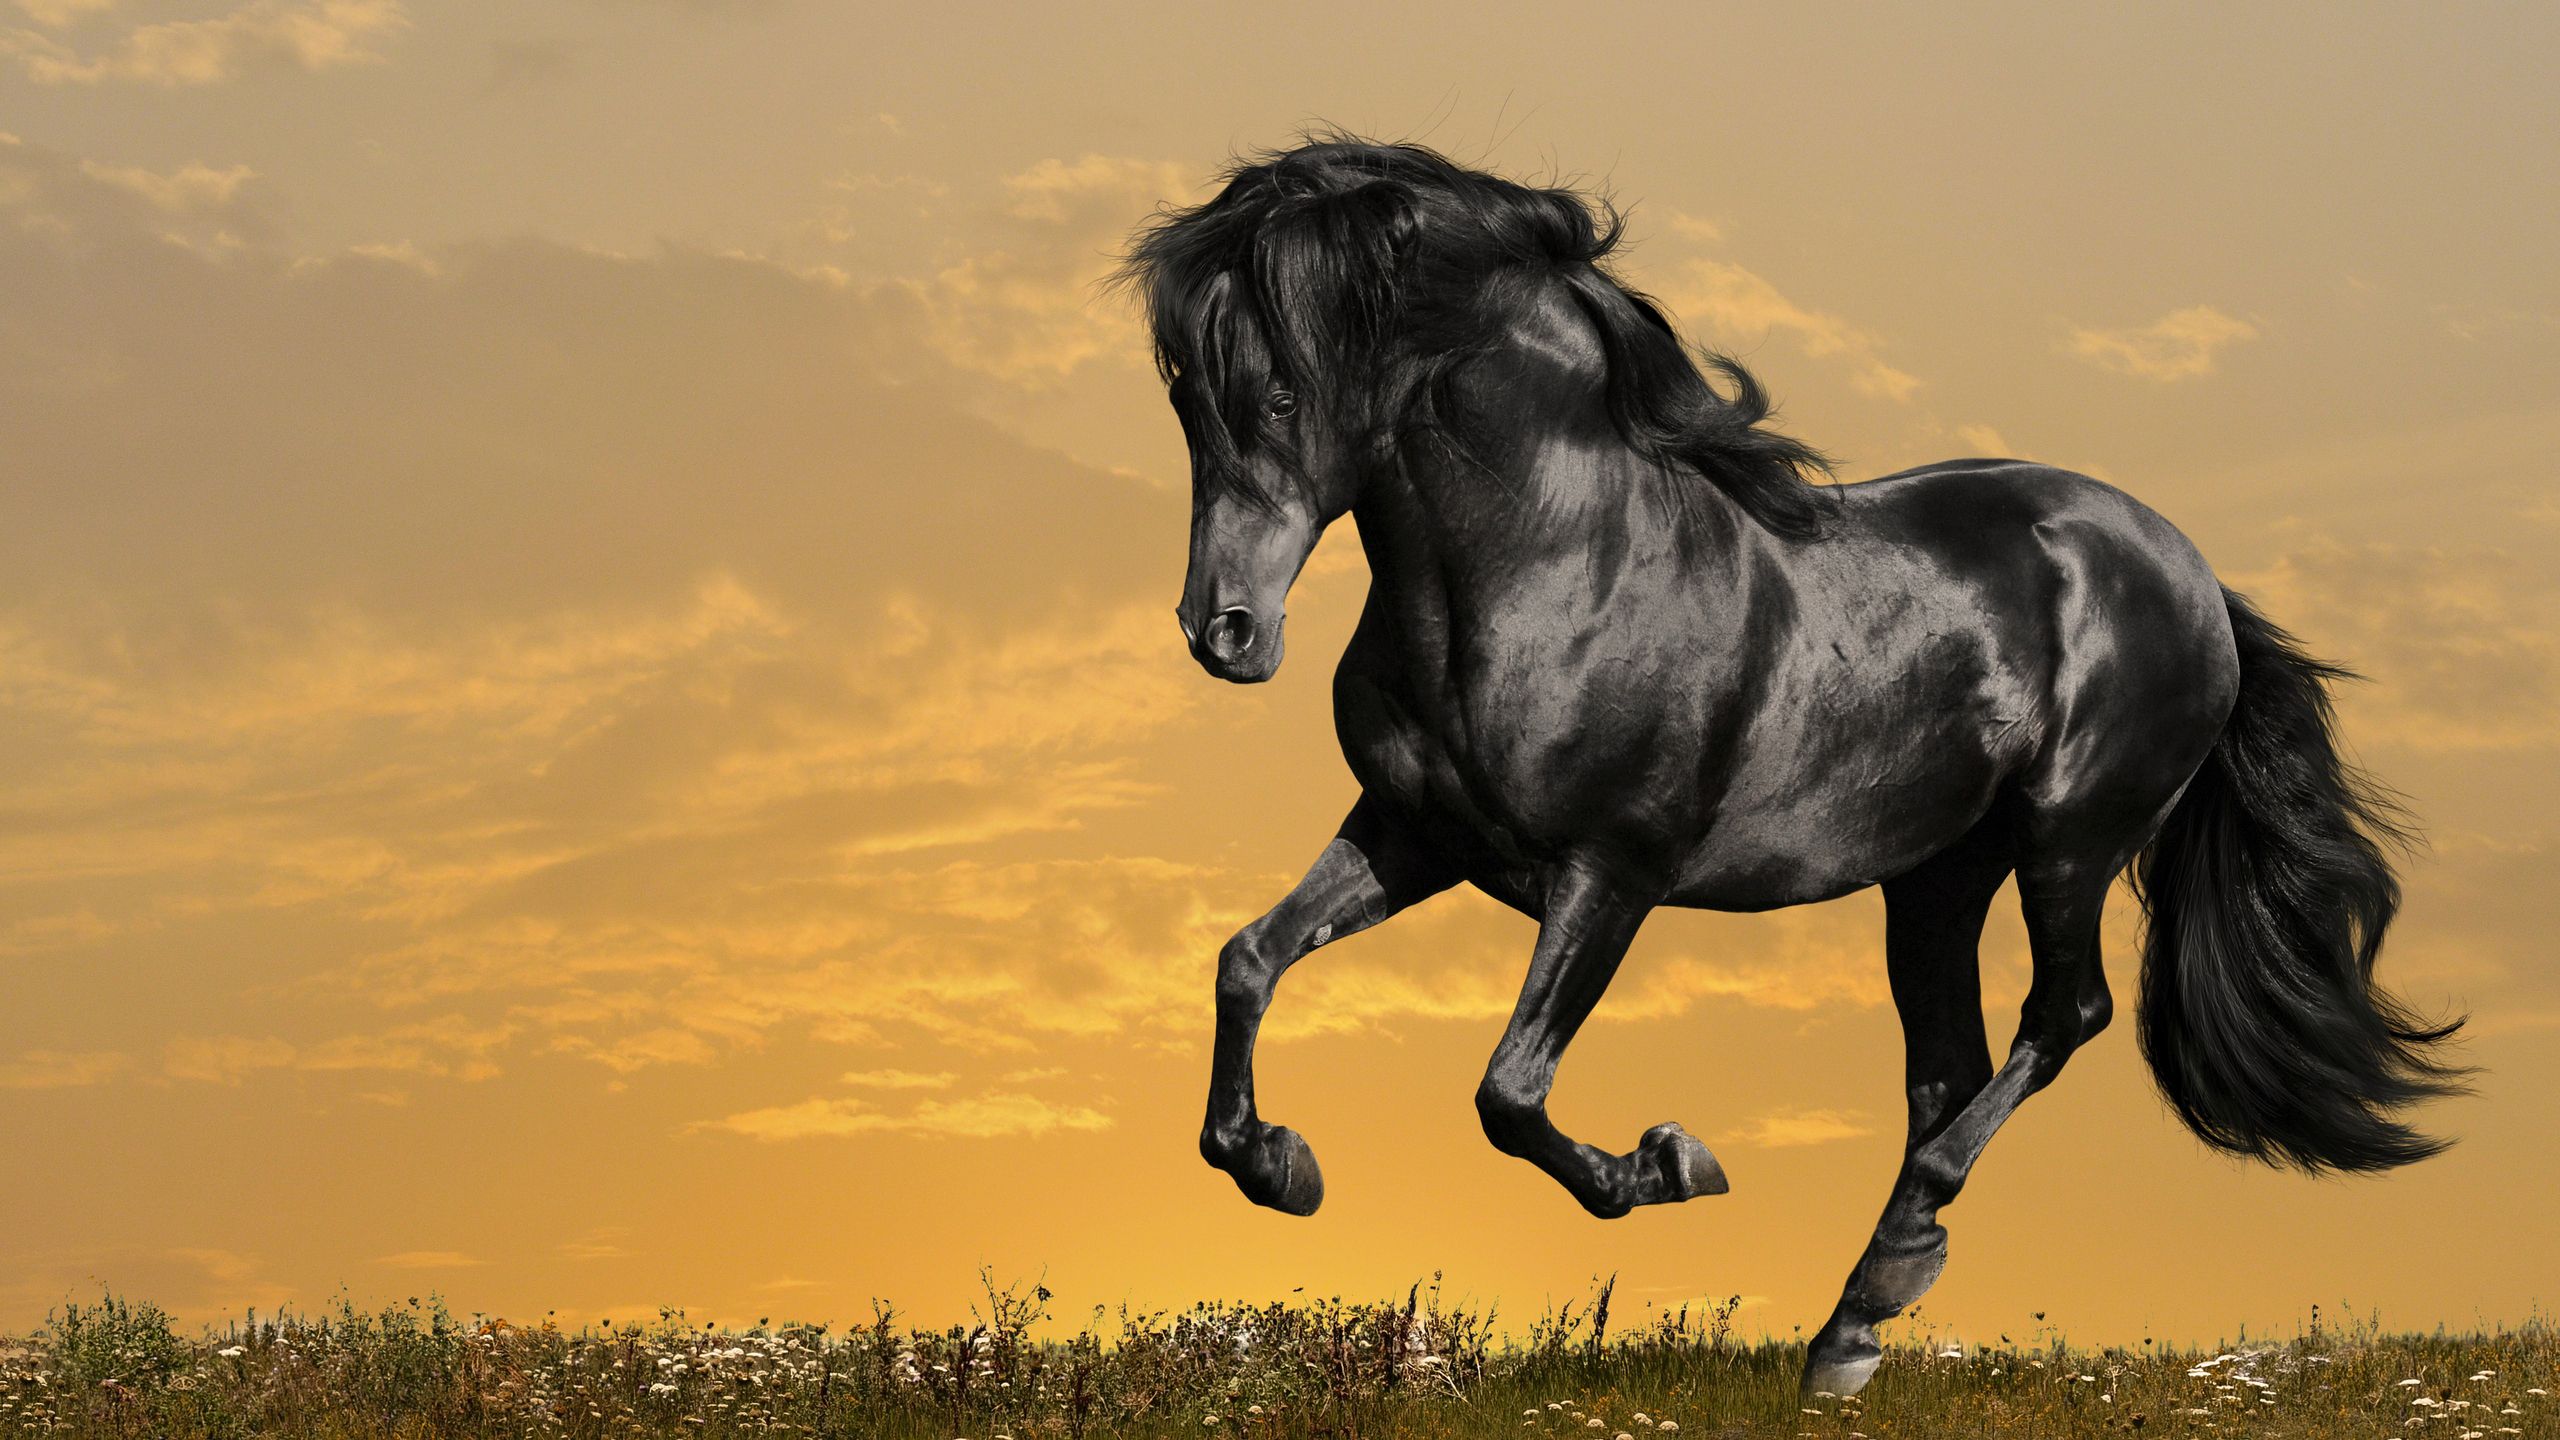 Black Horse With Cloudy Sky Wallpaper HD Horse